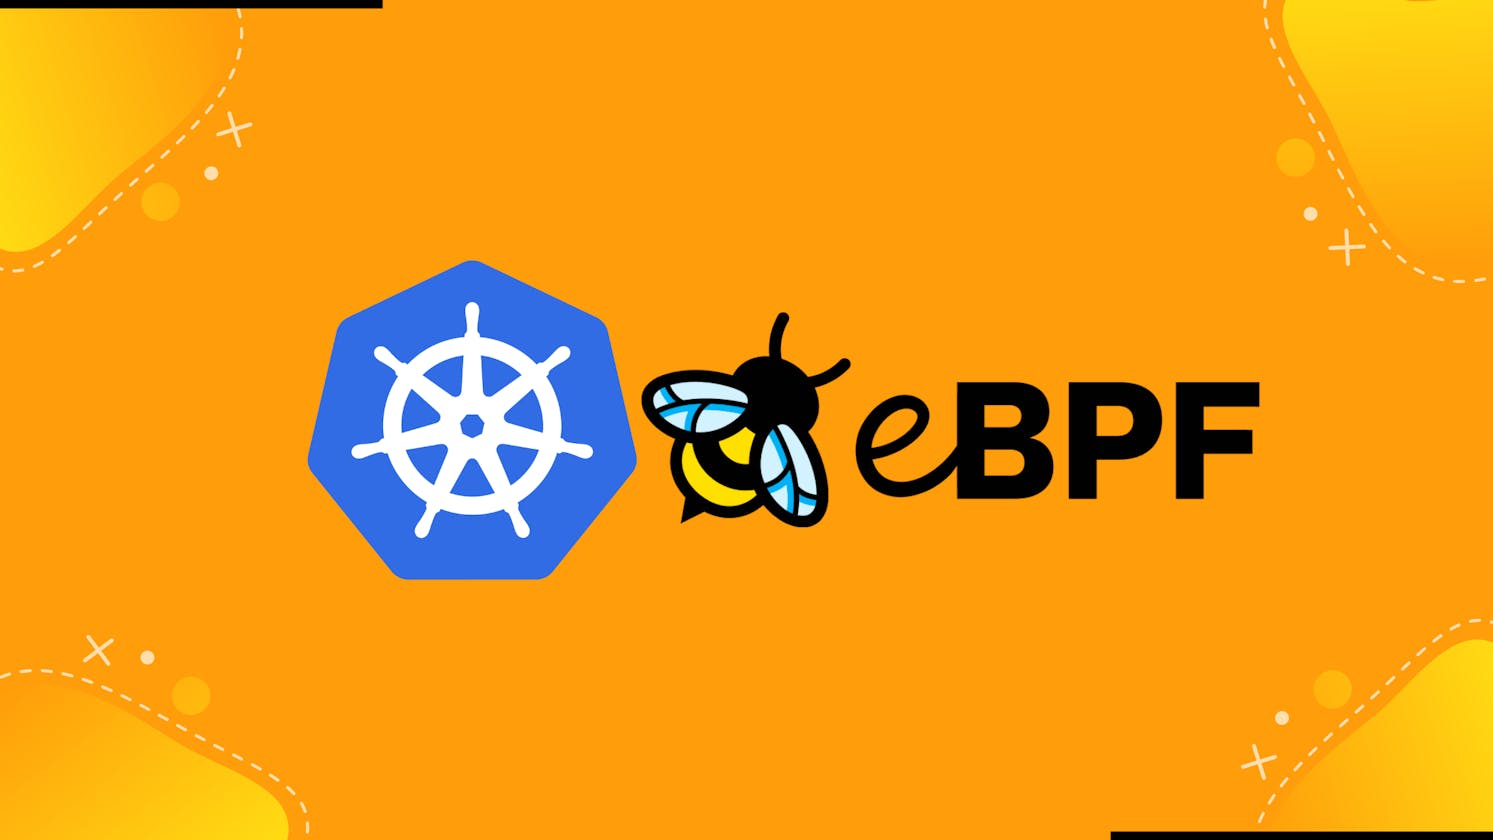 eBPF, Service Mesh and Sidecar